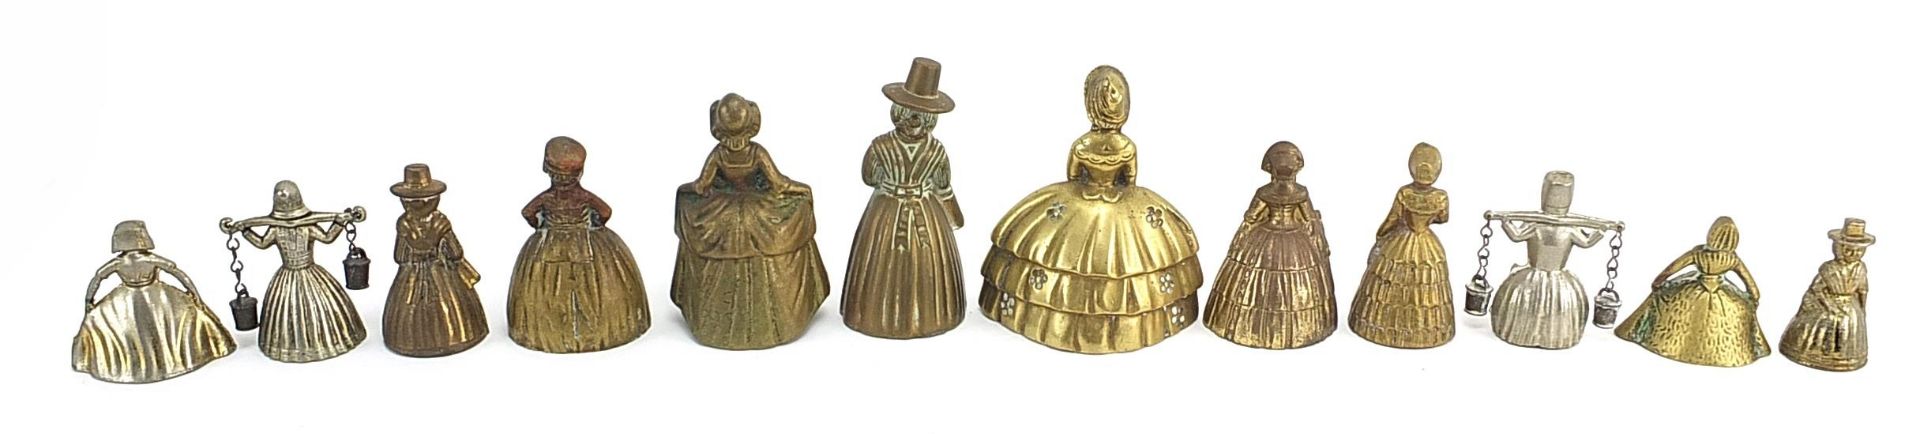 Twelve brass and white metal Crinoline Lady table bells, the largest 10.2cm high - Image 4 of 6